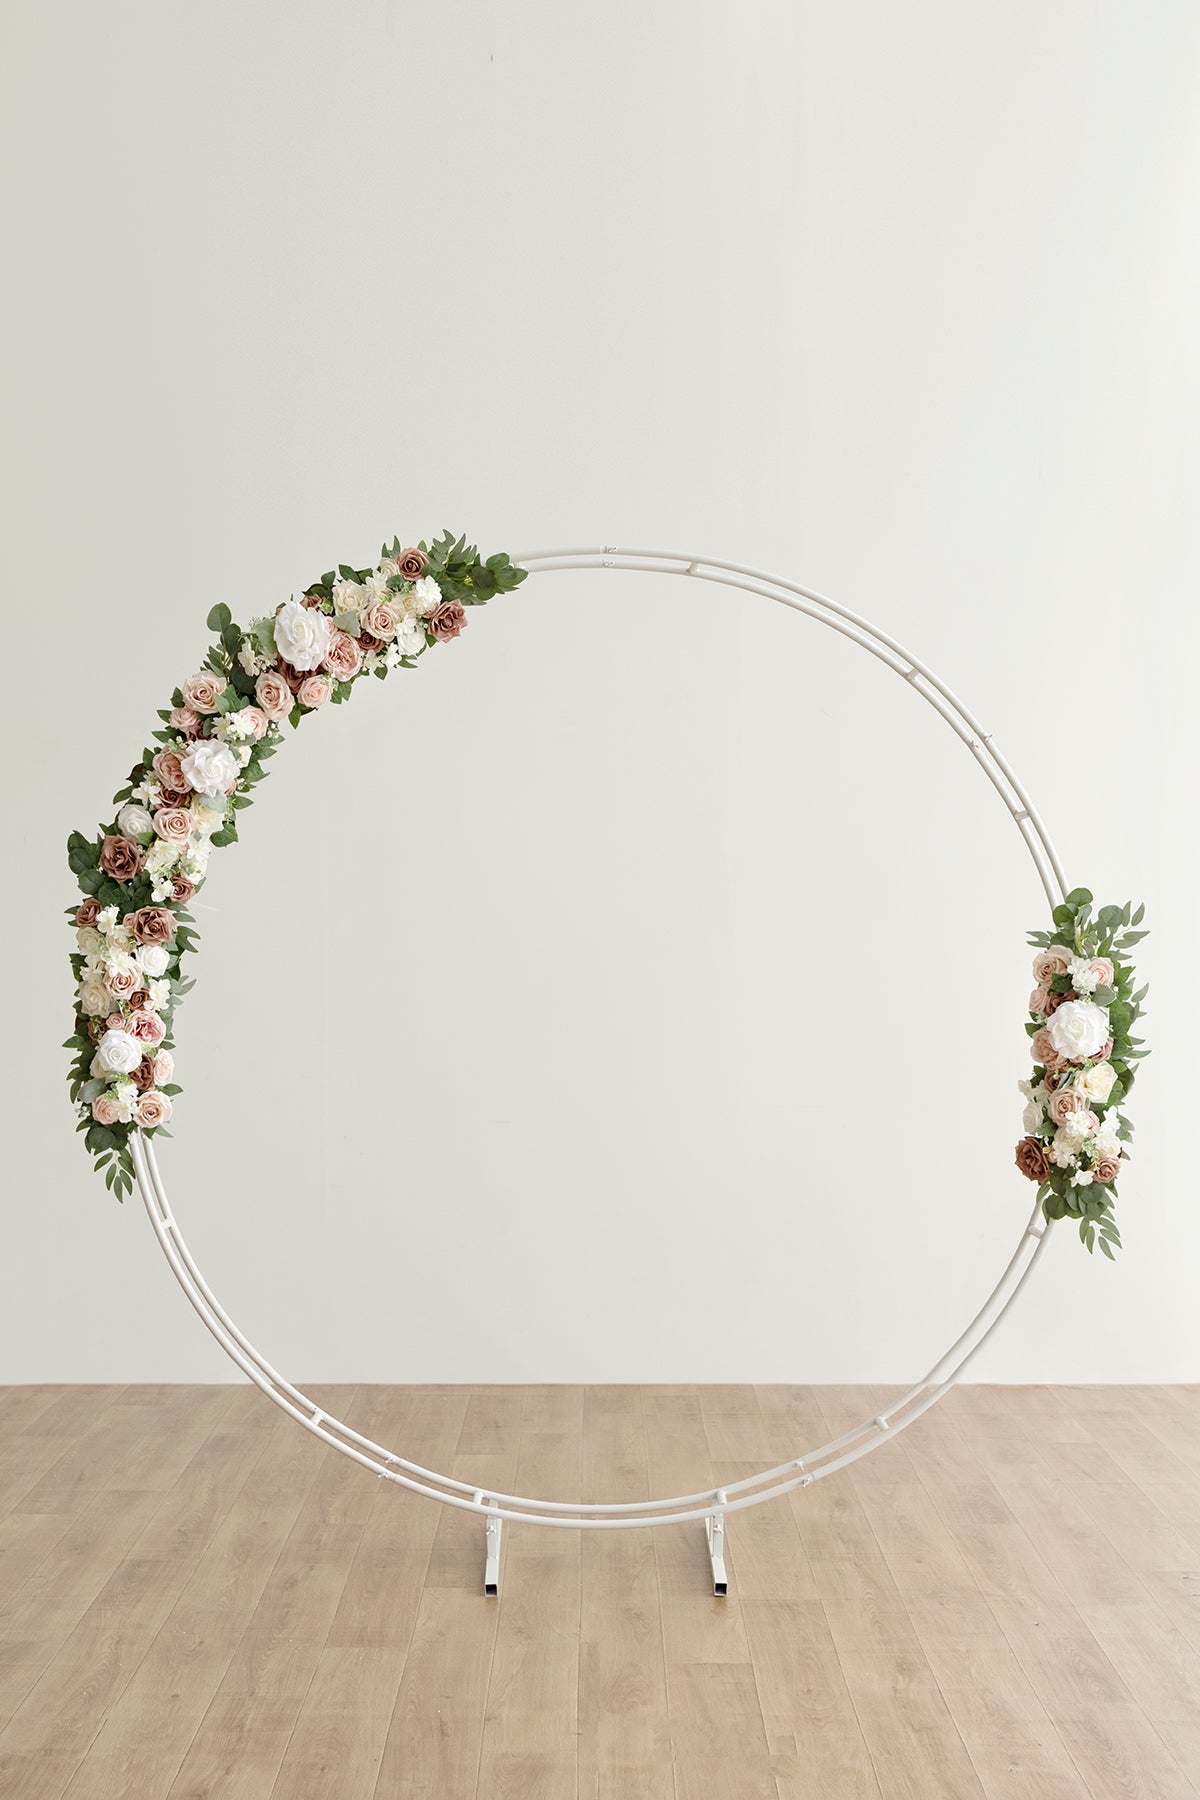 Flower Arrangements for Arch Decor in Dusty Rose & Cream | Clearance